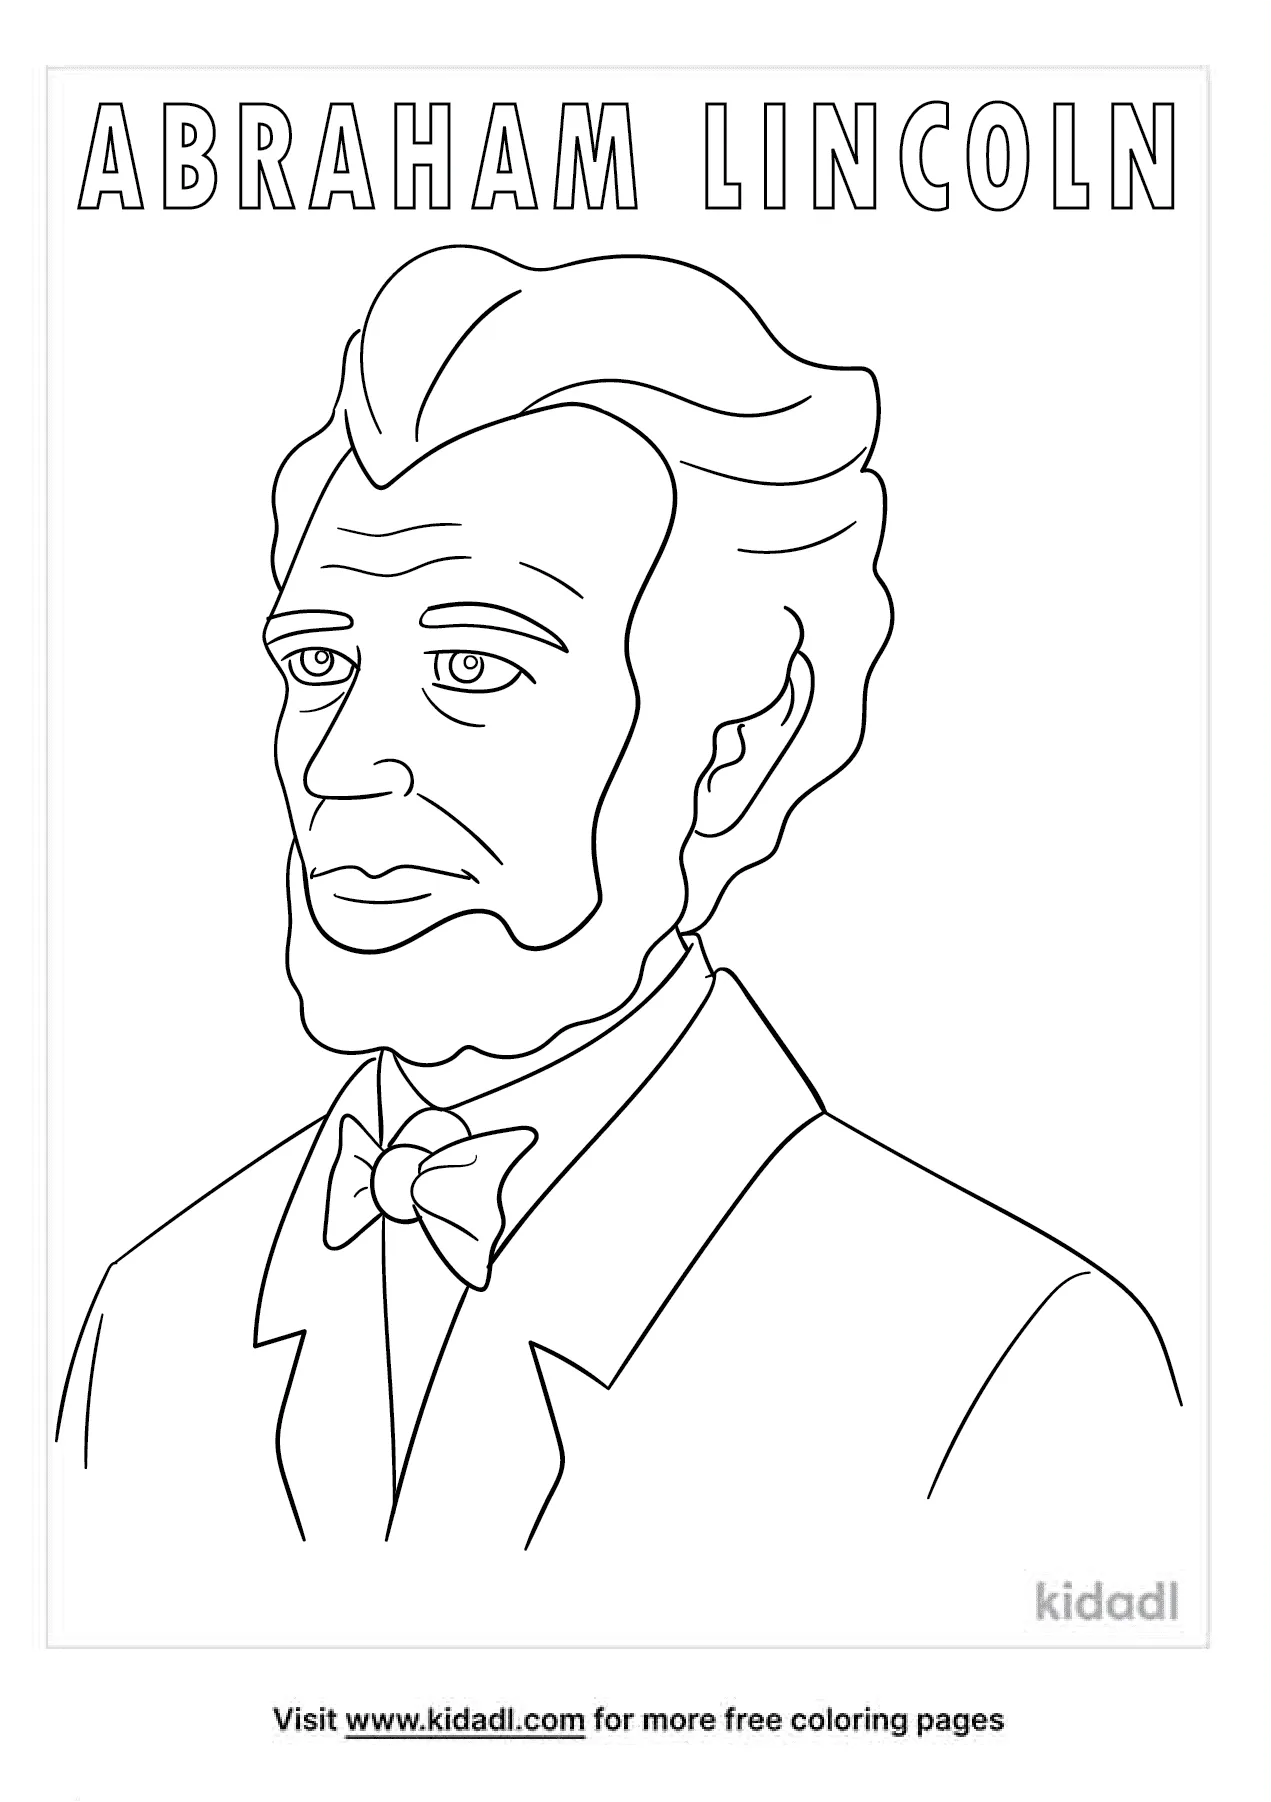 Abraham Lincoln Coloring Pages   Free History Coloring Pages   Kidadl